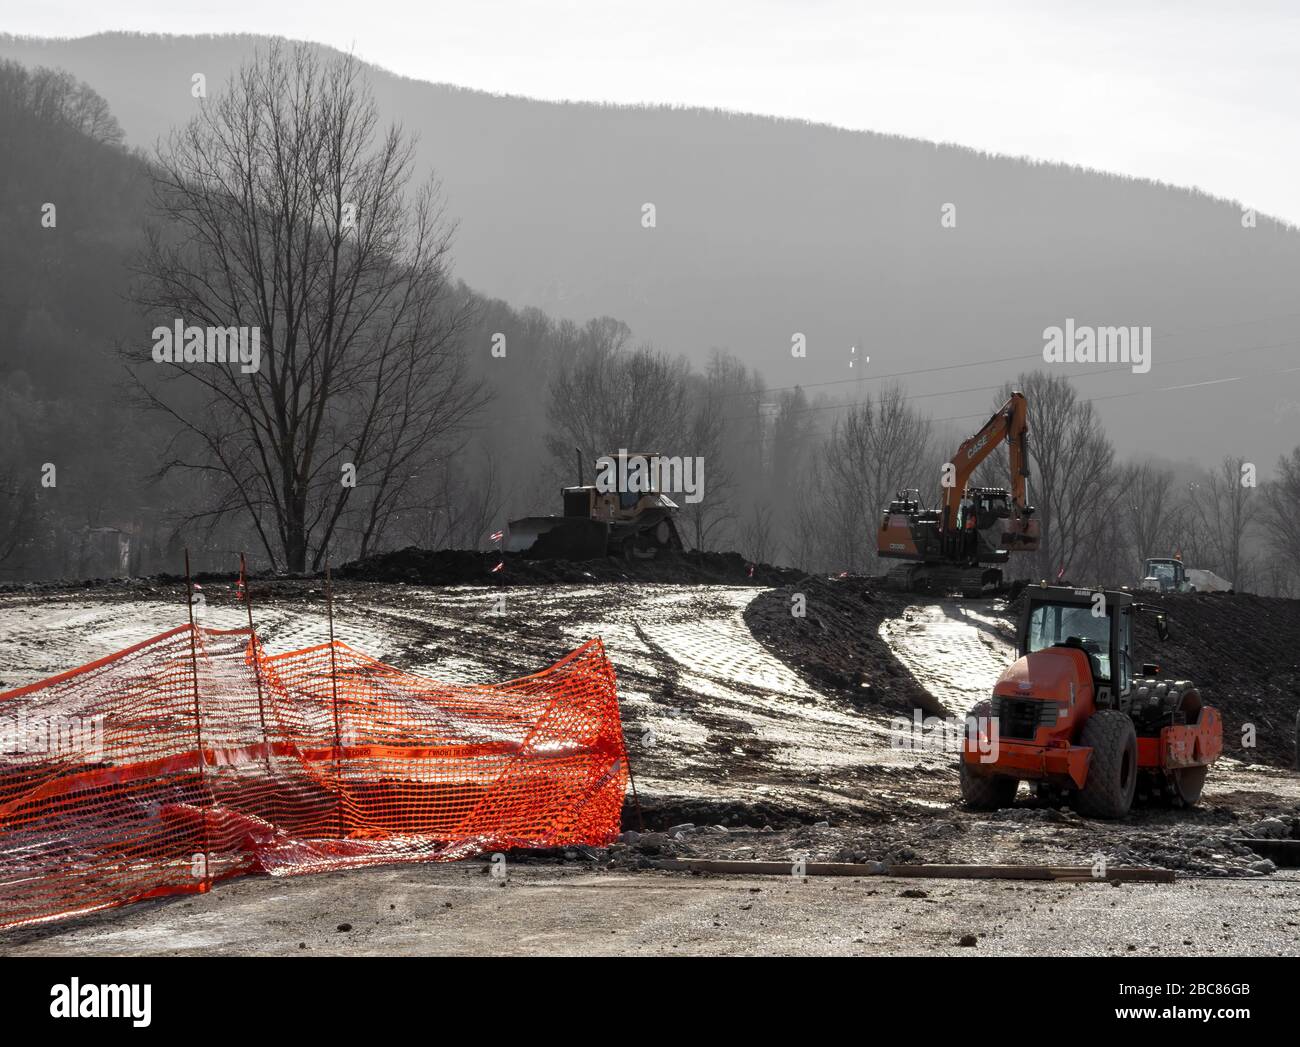 AULLA, NORTH TUSCANY, ITALY - February 12 2020: Excavation and earth moving works continue with heavy plant. Wet early morning. Stock Photo